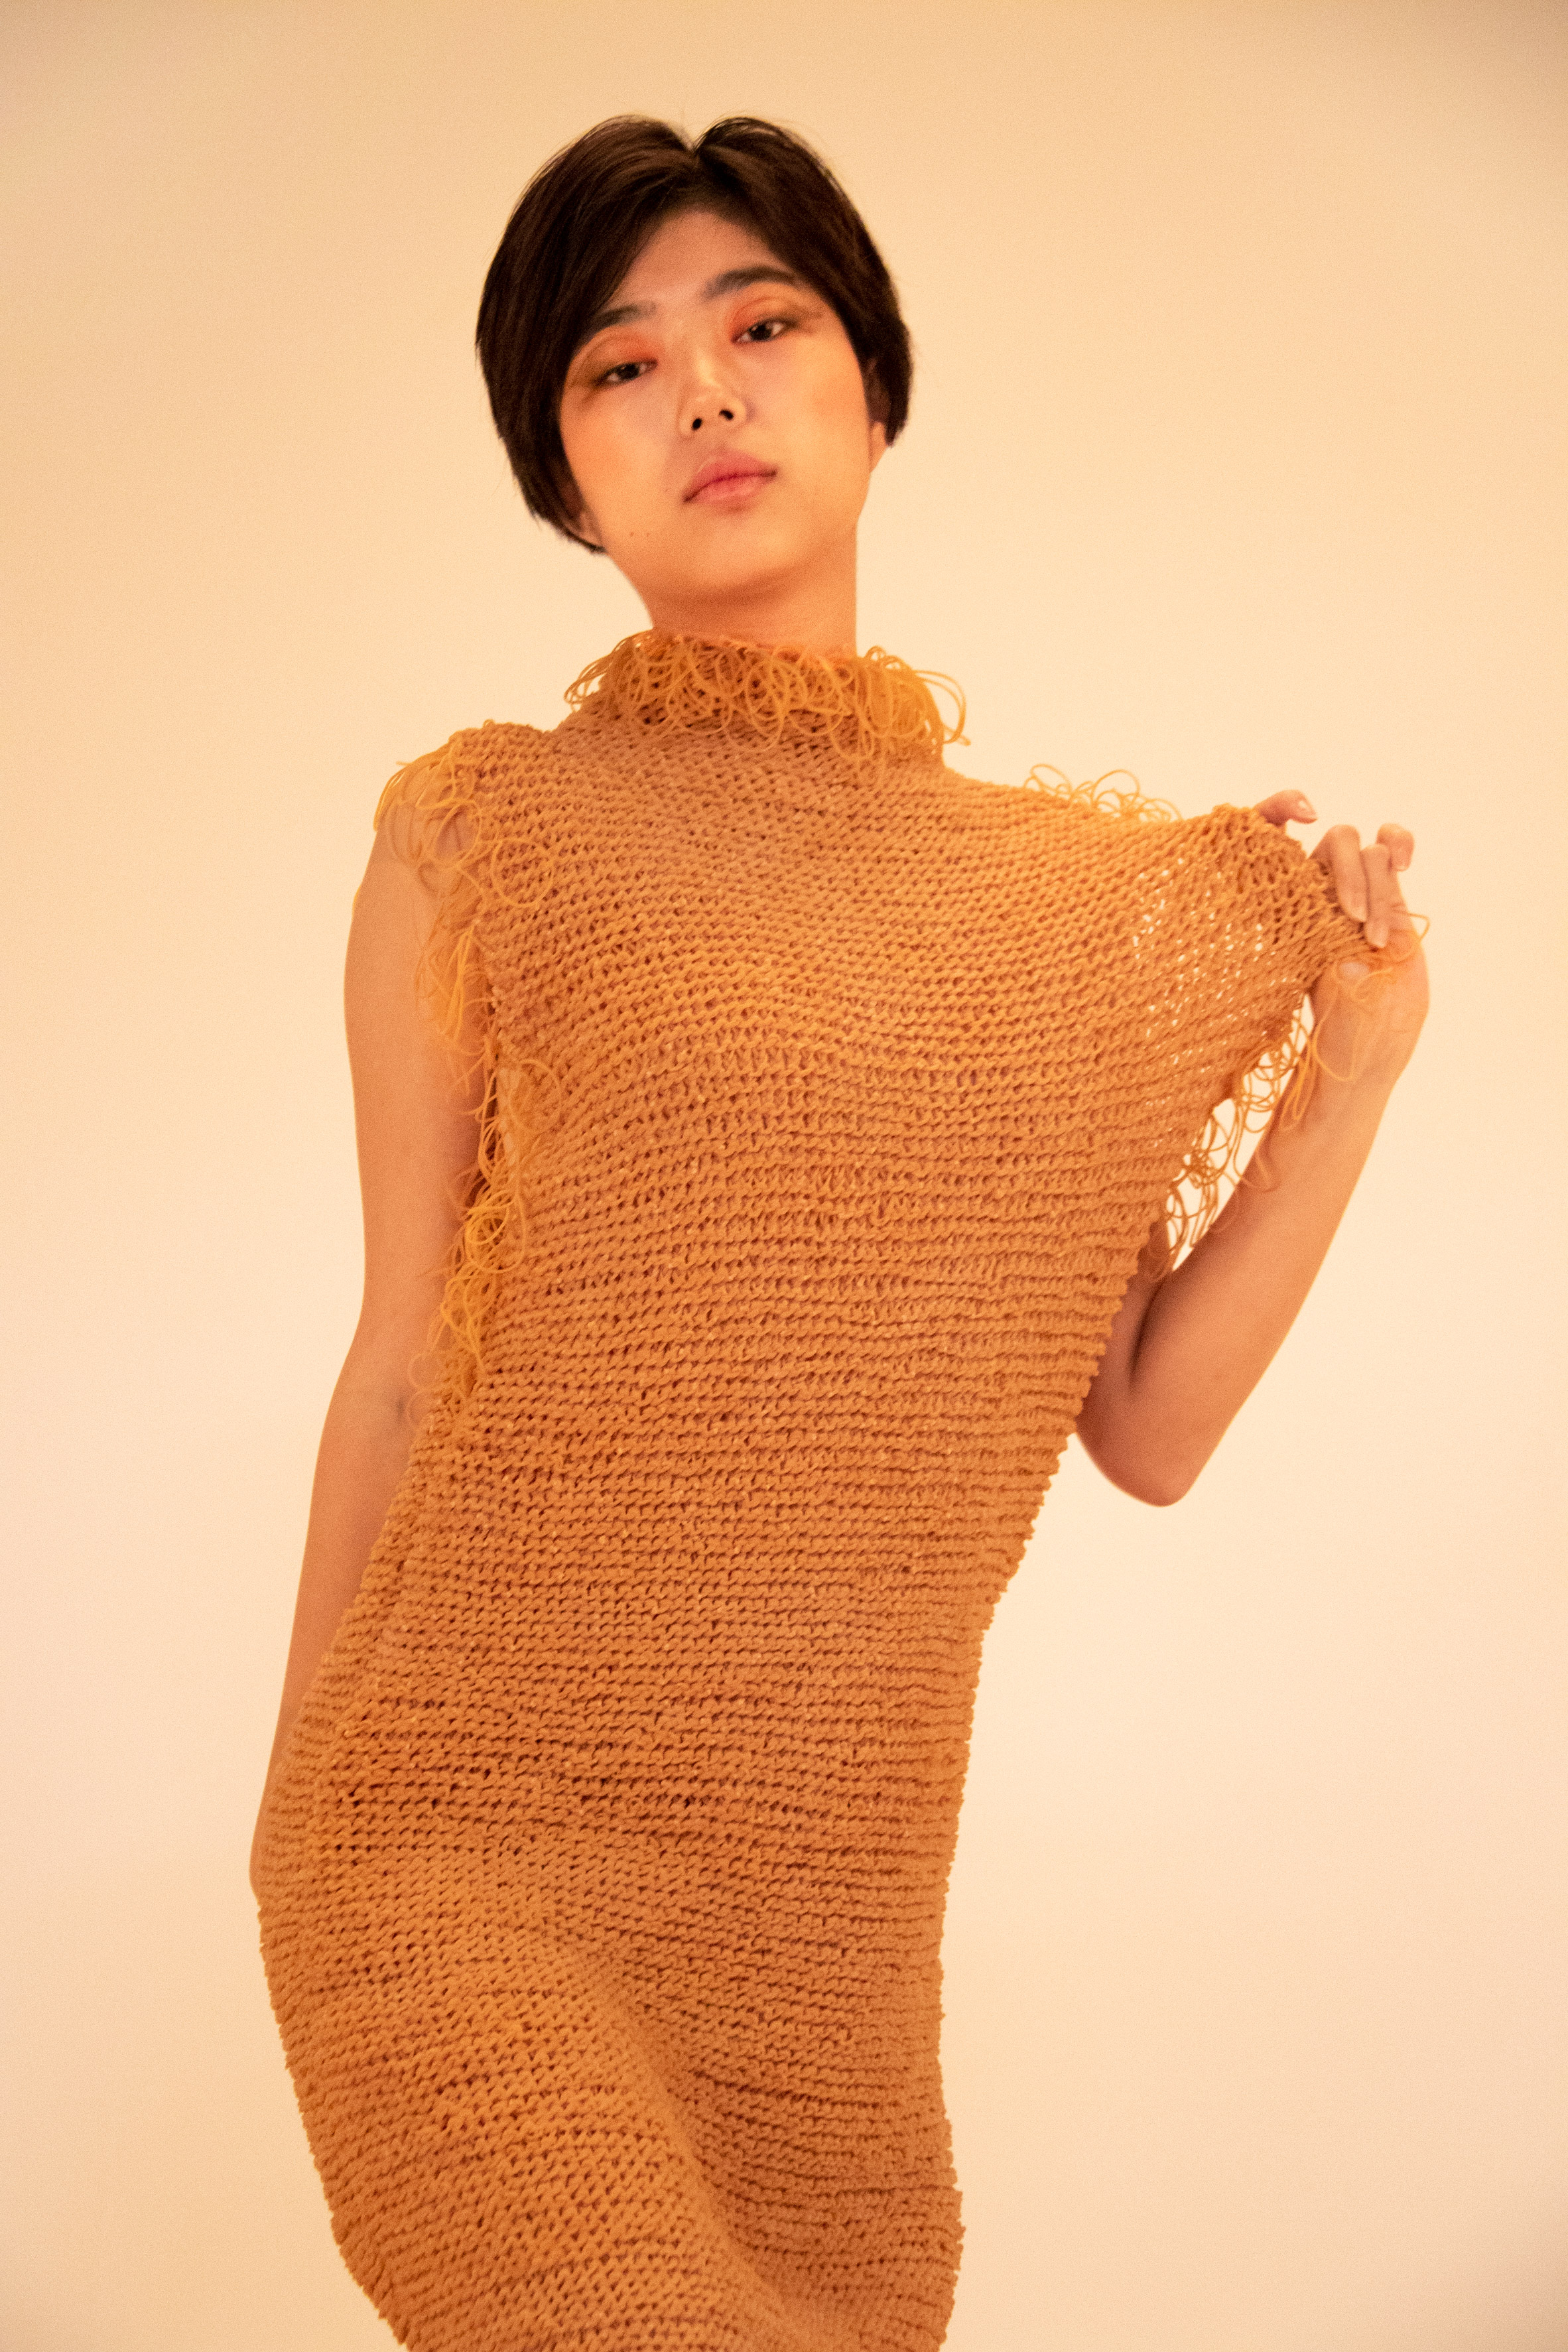 Rie Sakamoto knits rubber bands together like yarn for elastic garments